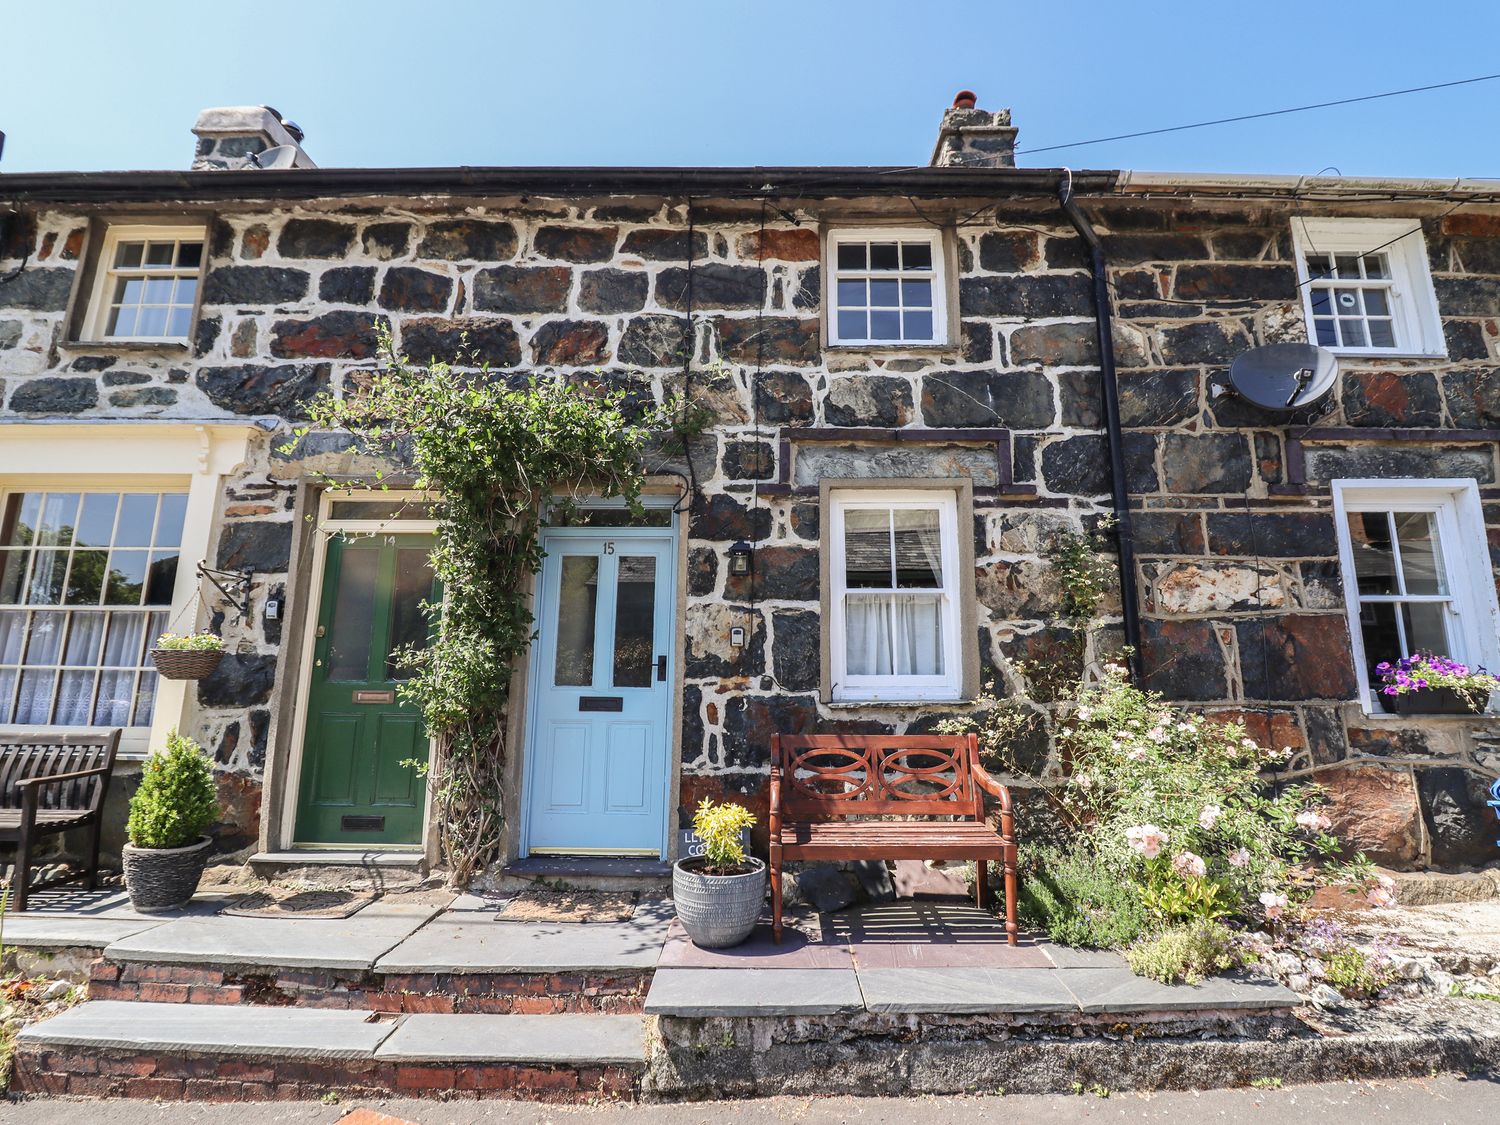 Llygoden Cottage - North Wales - 1134691 - photo 1